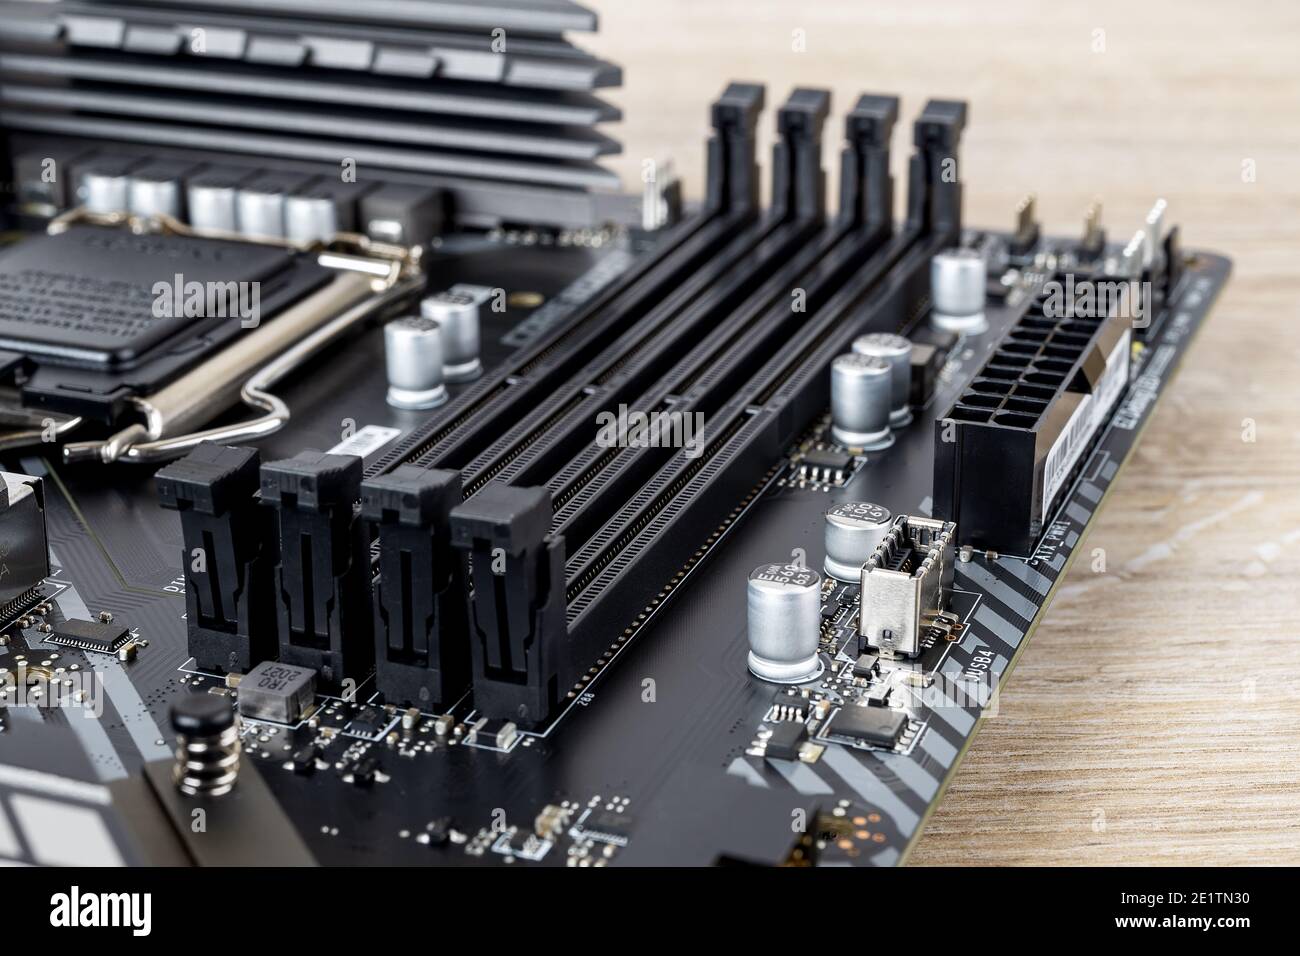 Four slots for ddr4 ram memory modules on a modern black pc motherboard. Computer mainboard circuit components. Desktop hardware close-up. Stock Photo